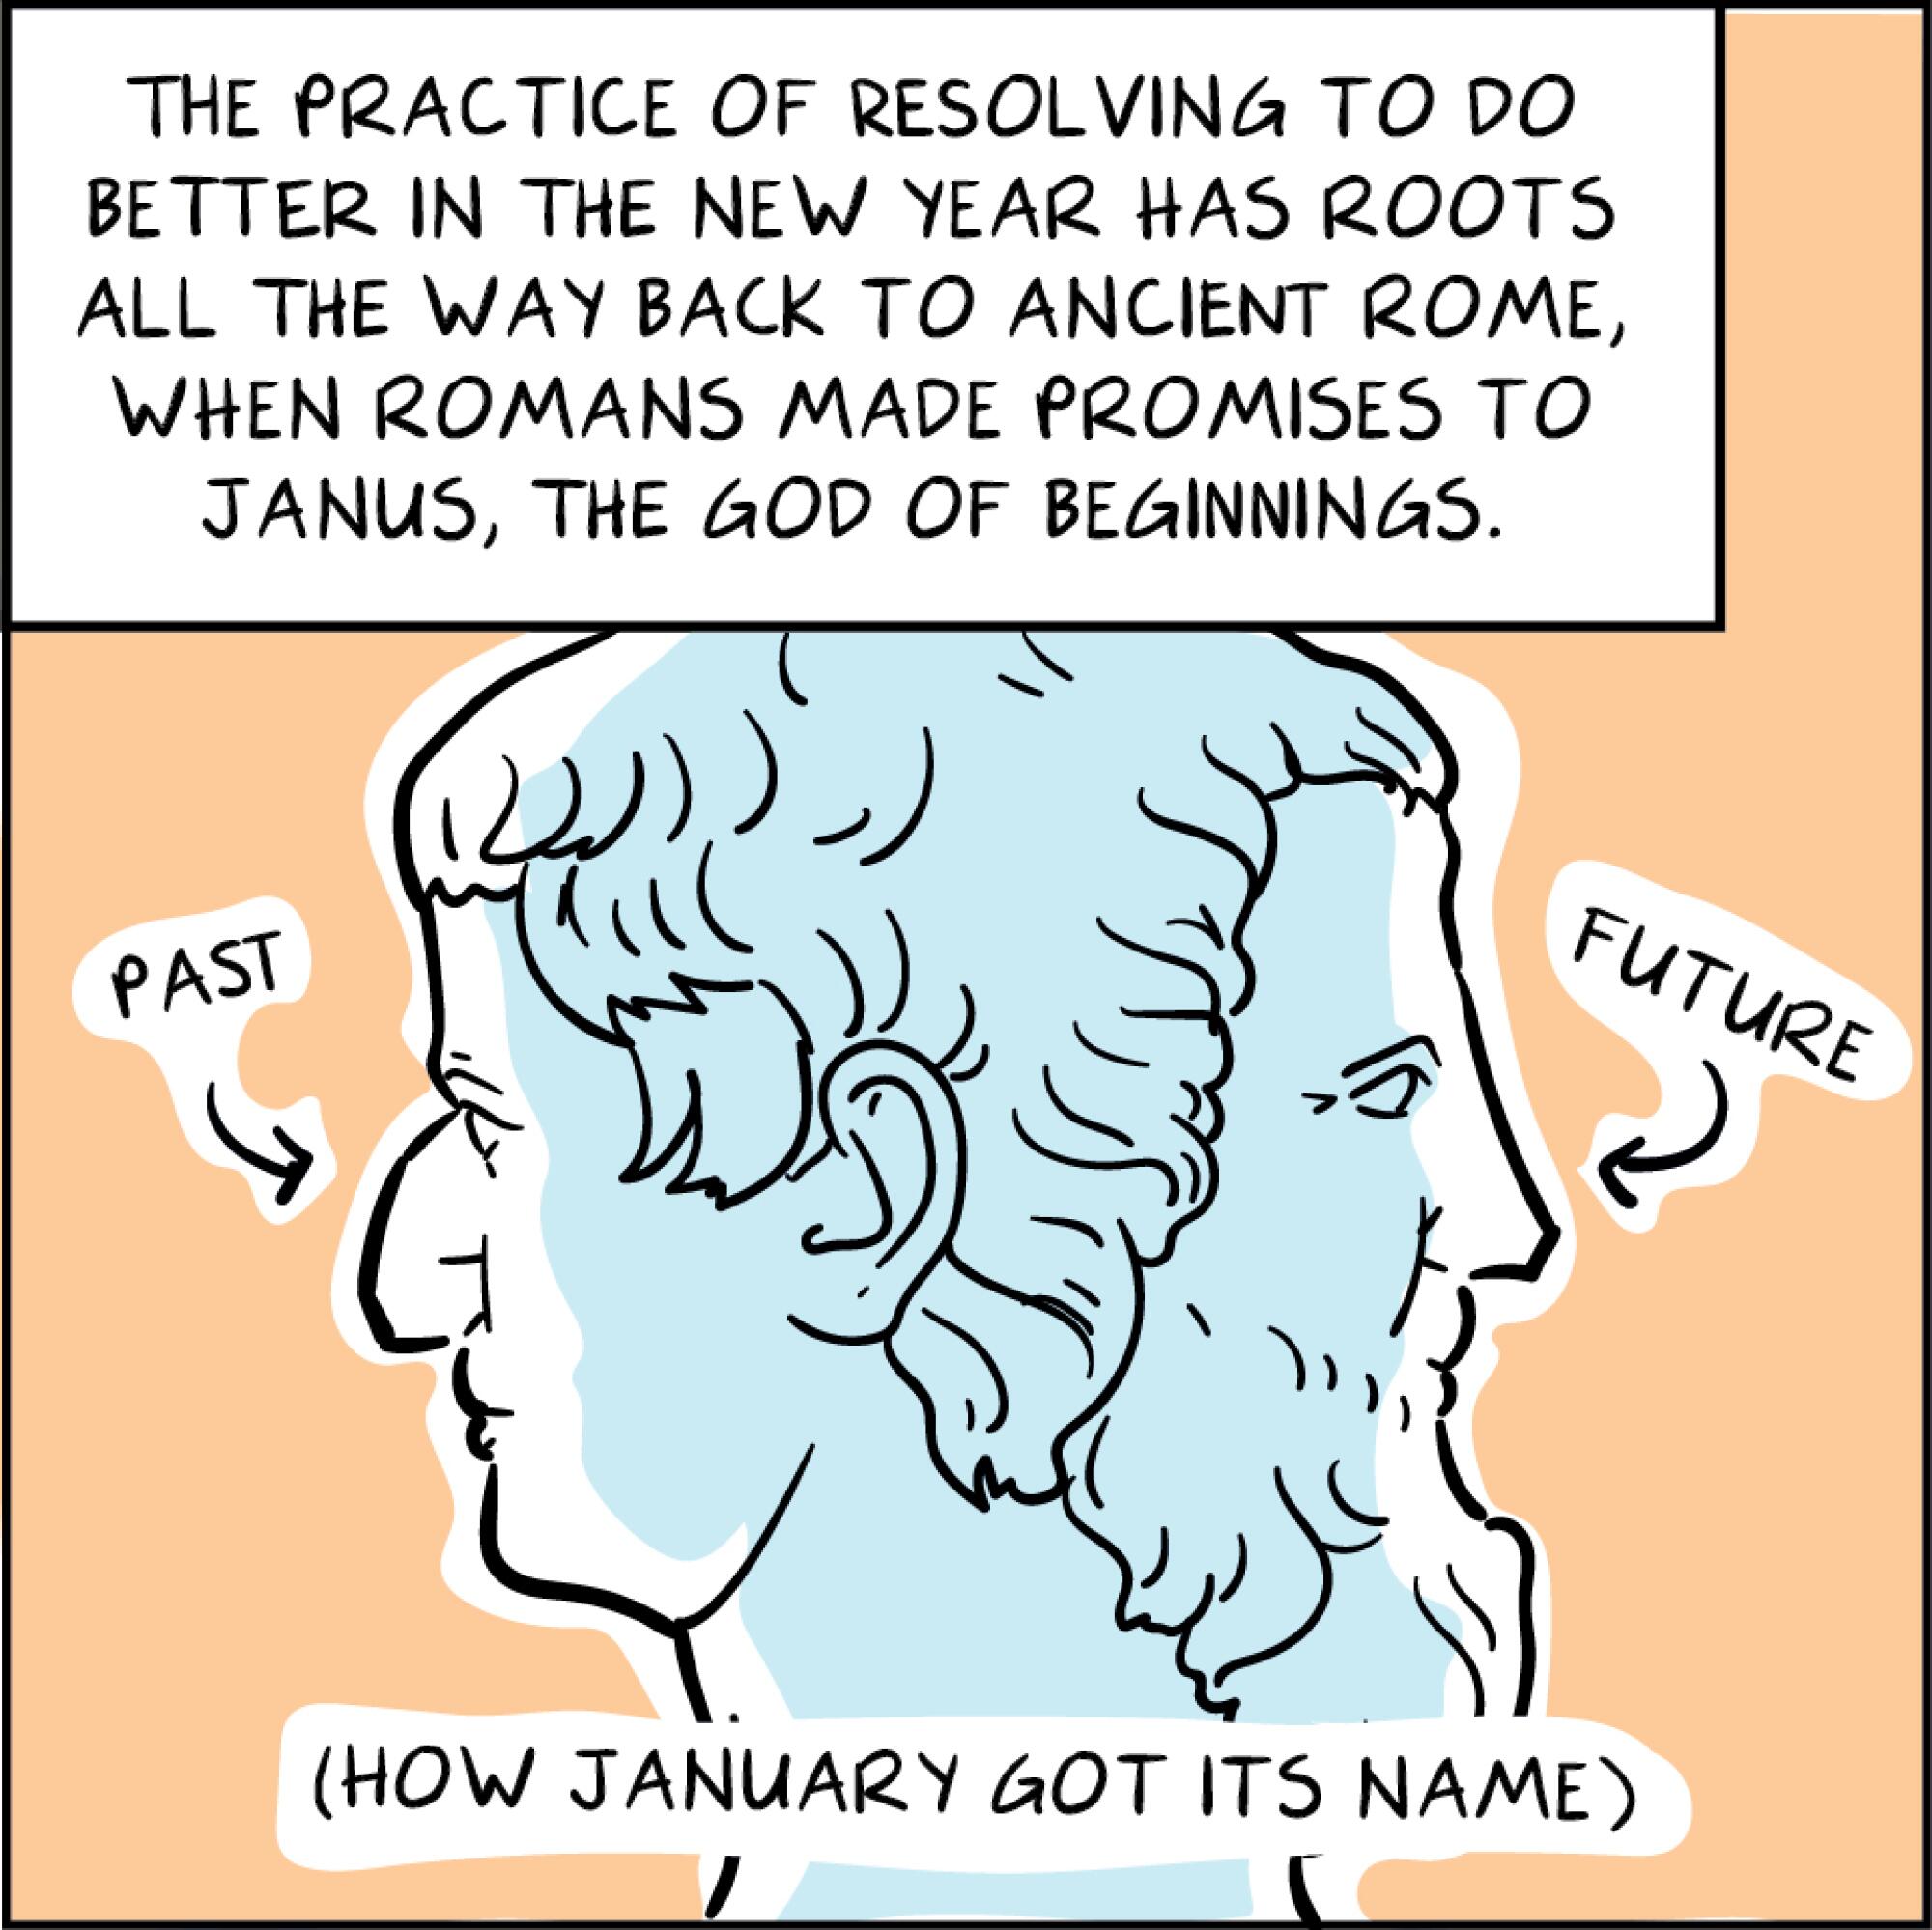 the practice of resolutions has roots all the way back to ancient rome when romans made promises to Janus, god of beginnings